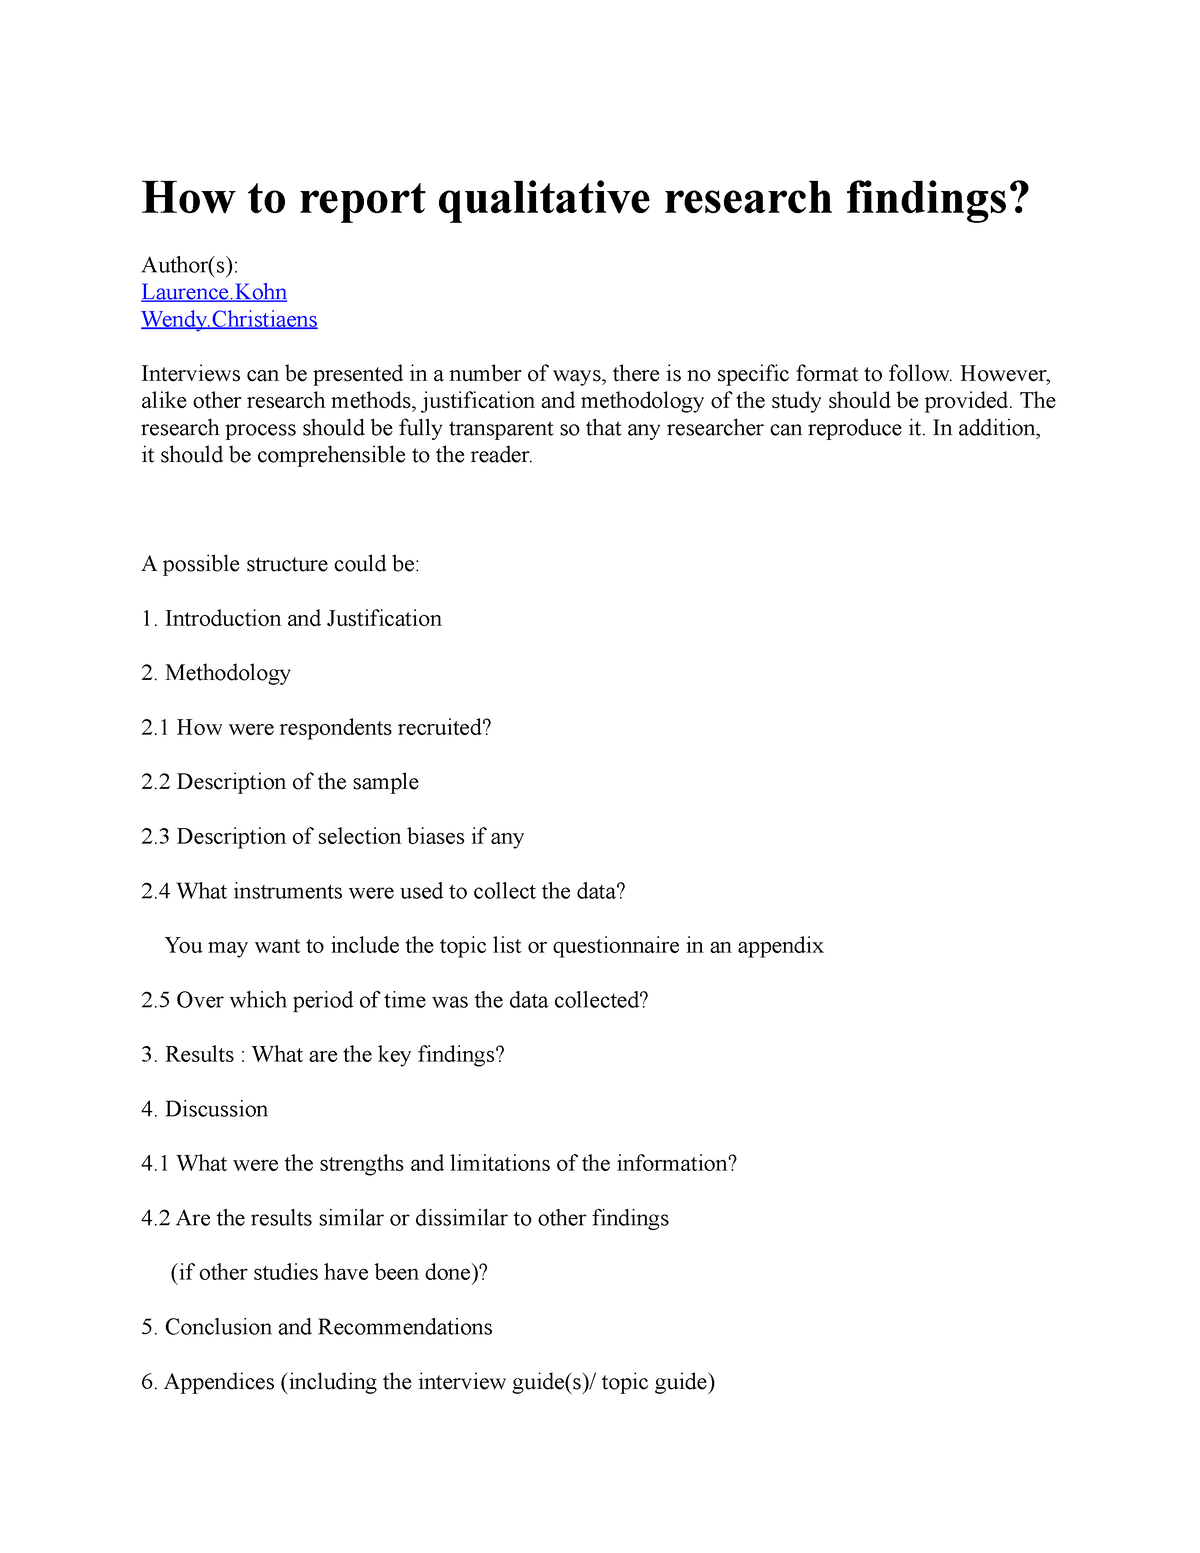 how to discuss findings in qualitative research